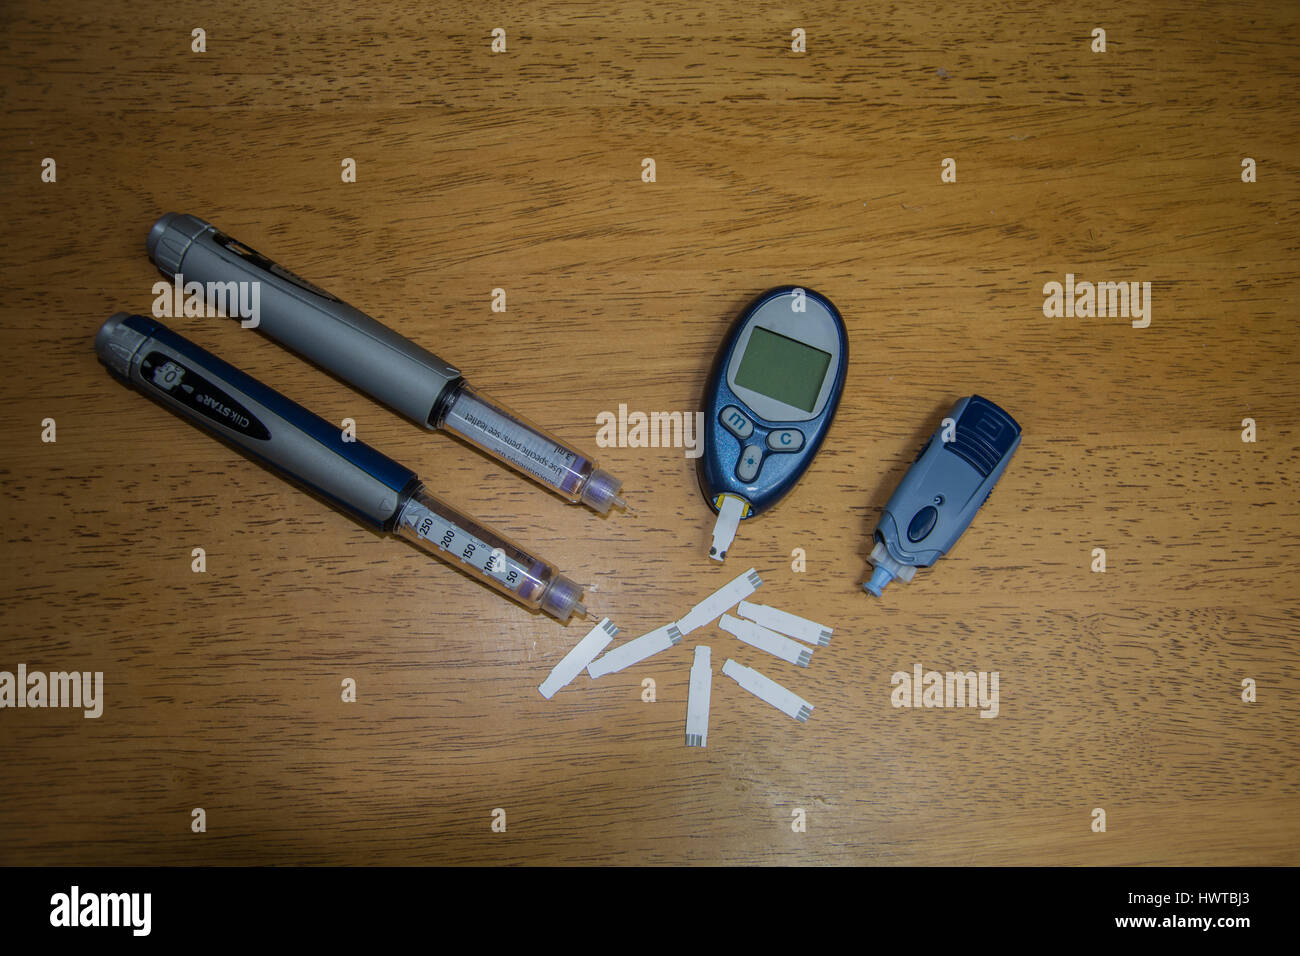 Living with Diabetes an everyday routine Stock Photo